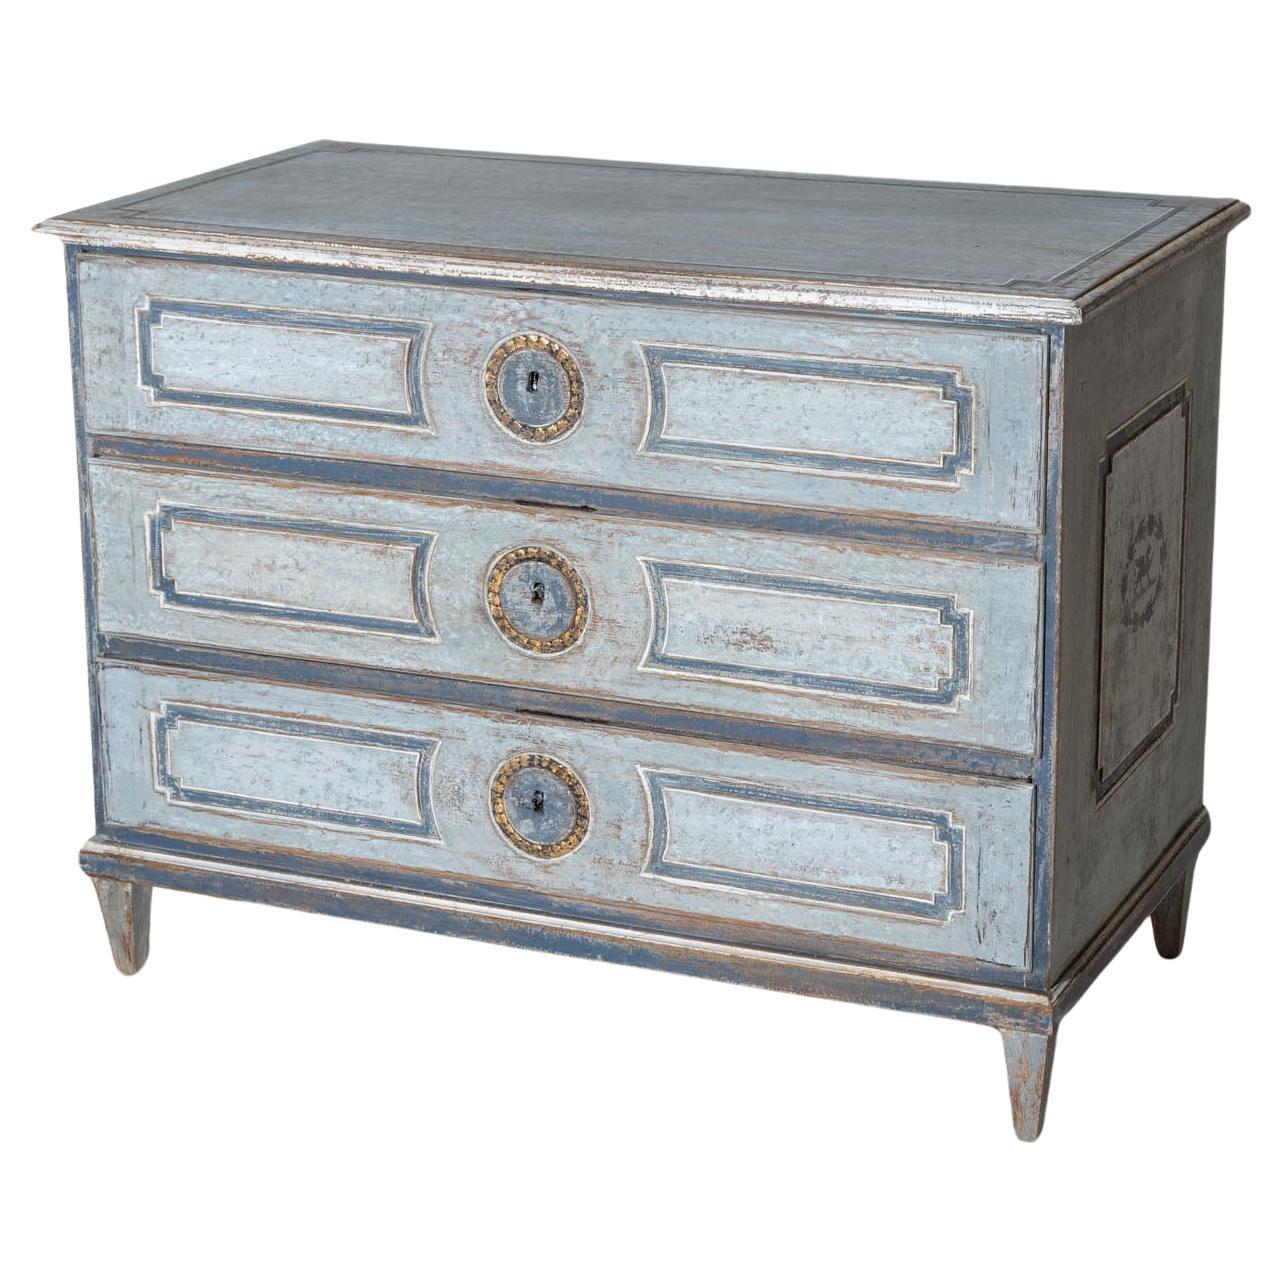 Louis Seize Chest of Drawers, late 18th Century